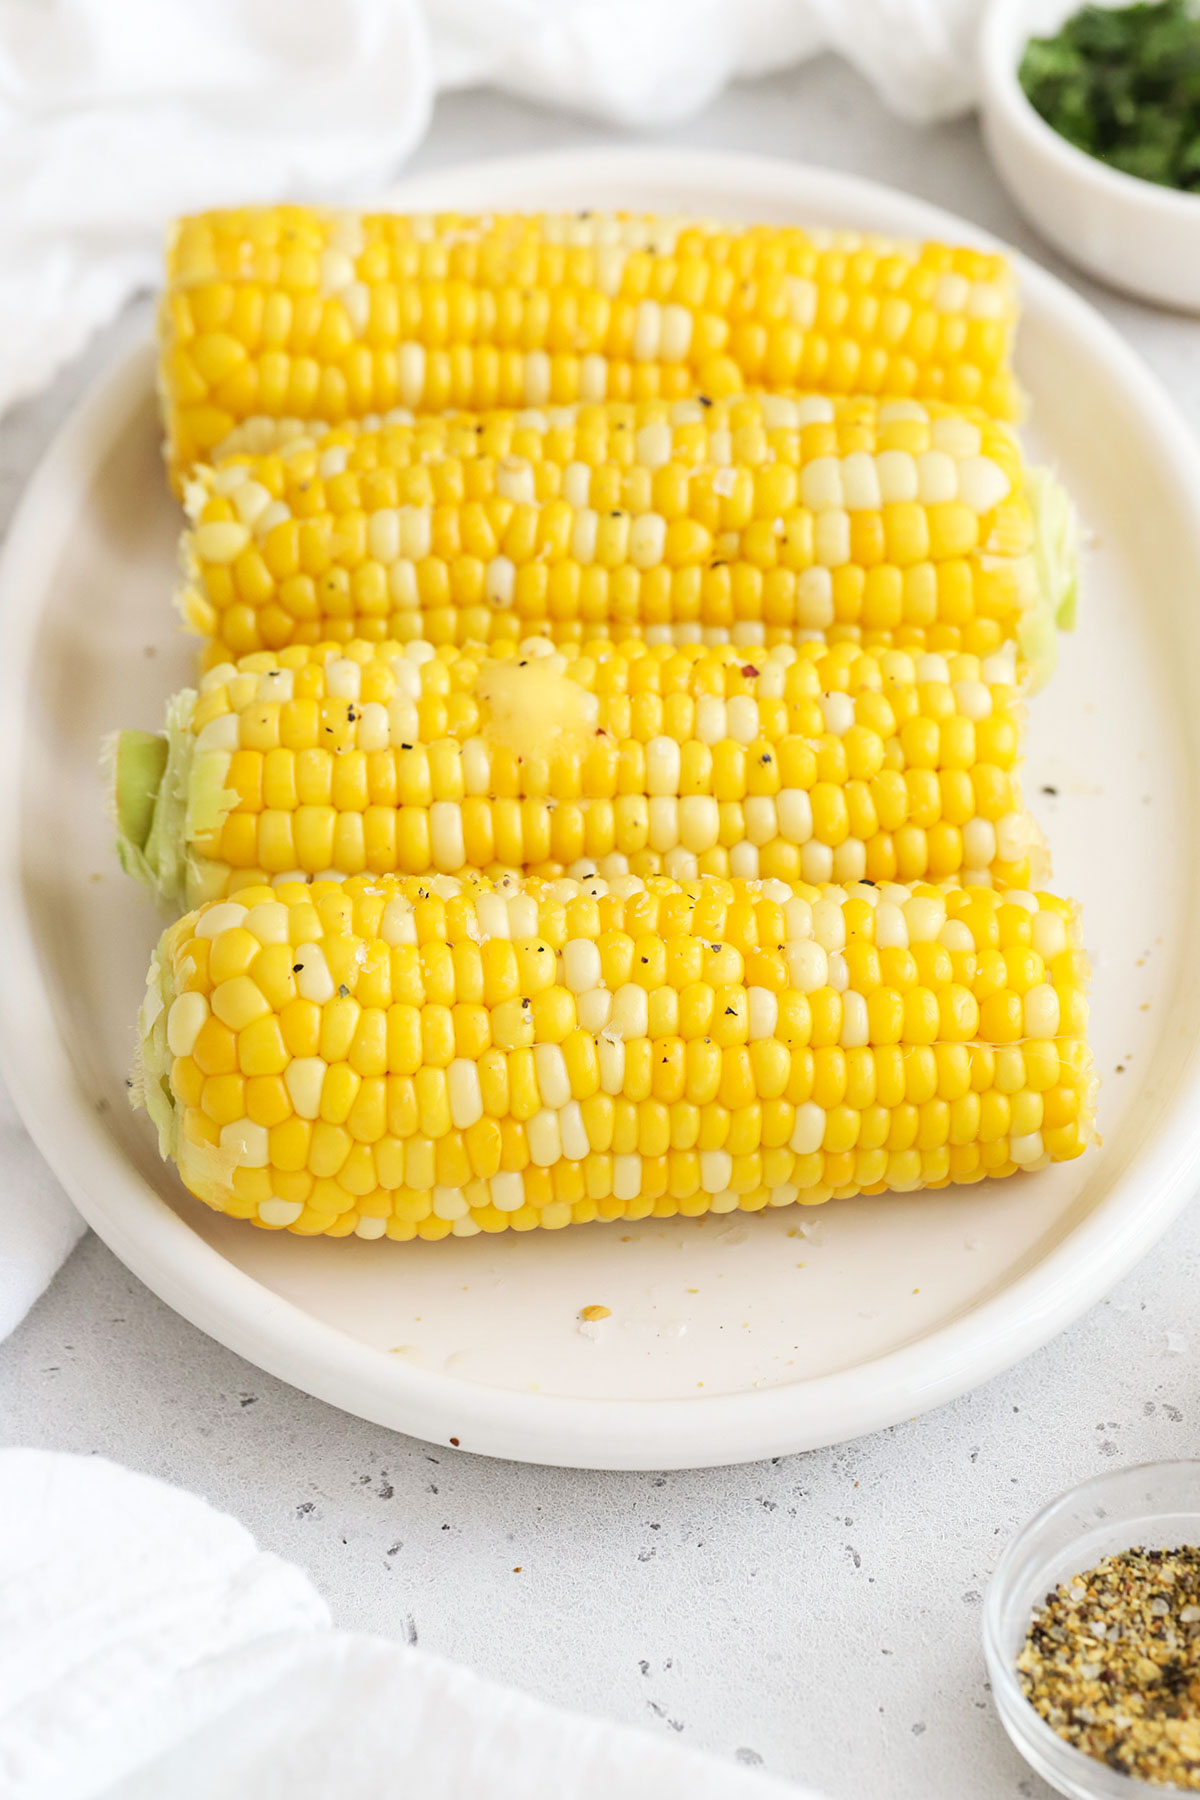 4 ears of boiled corn on the cob on a white platter